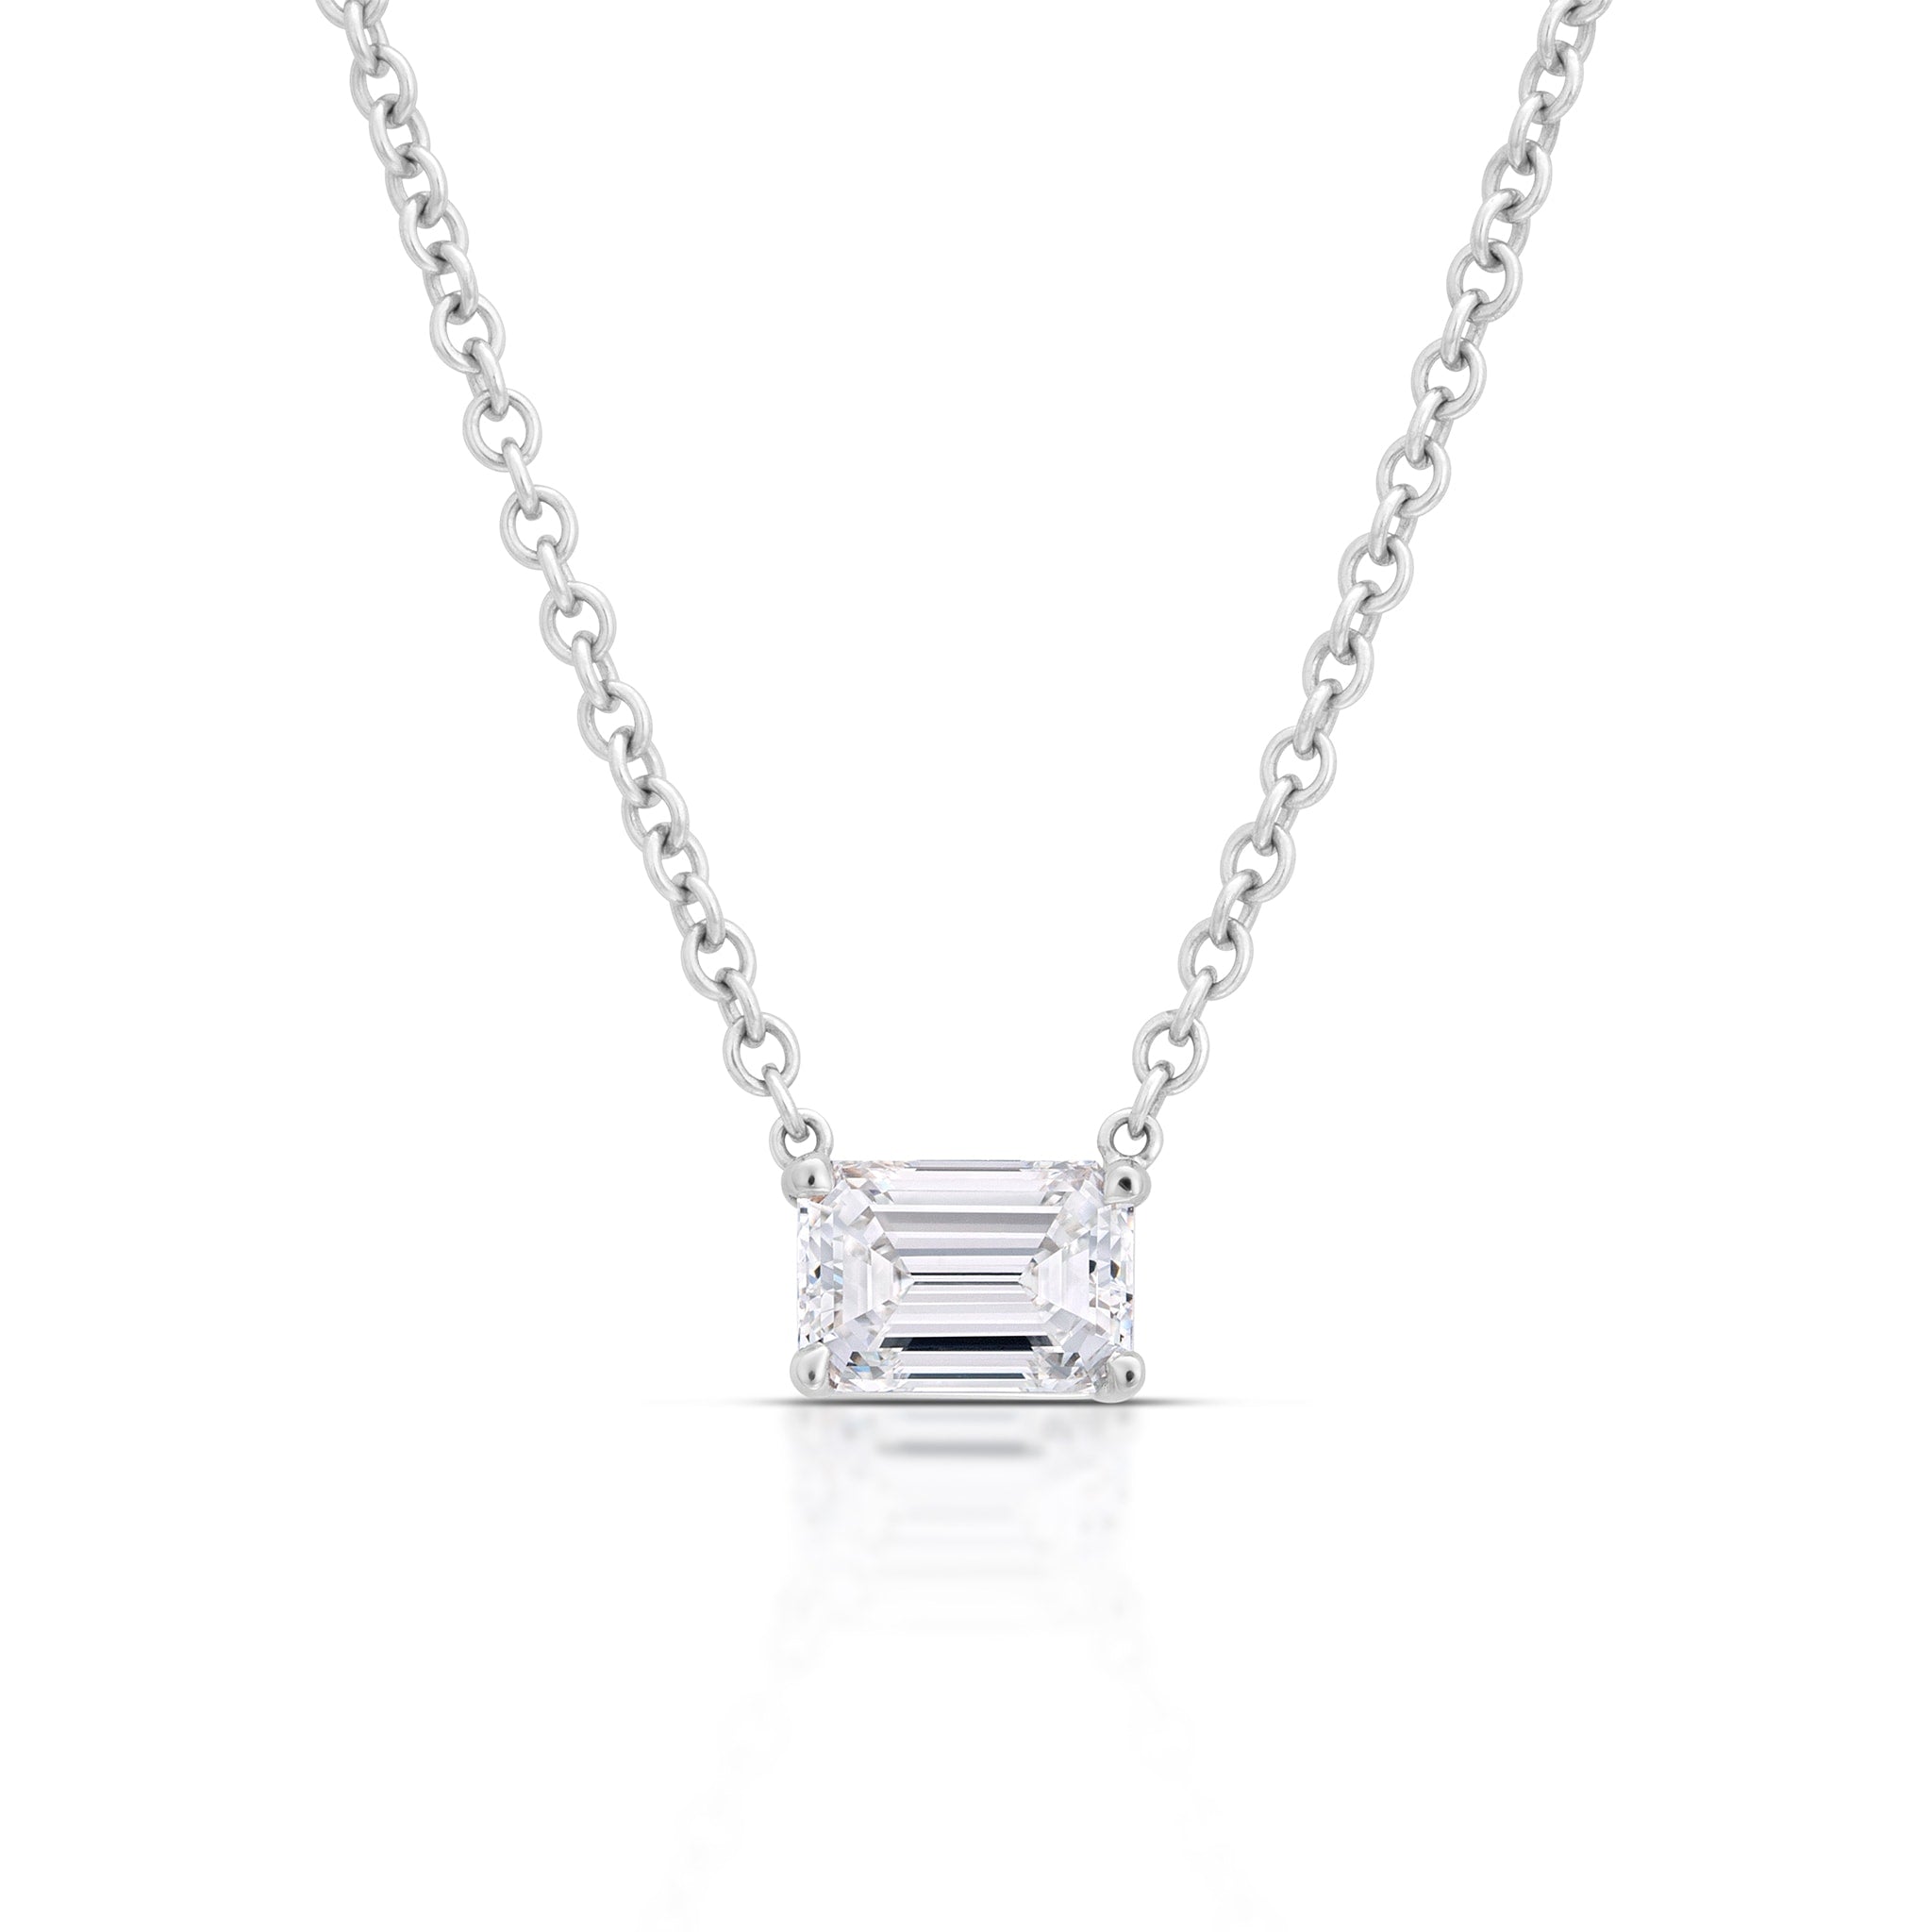 Floating Emerald Diamond Necklace in 14K White Gold (0.52ct)